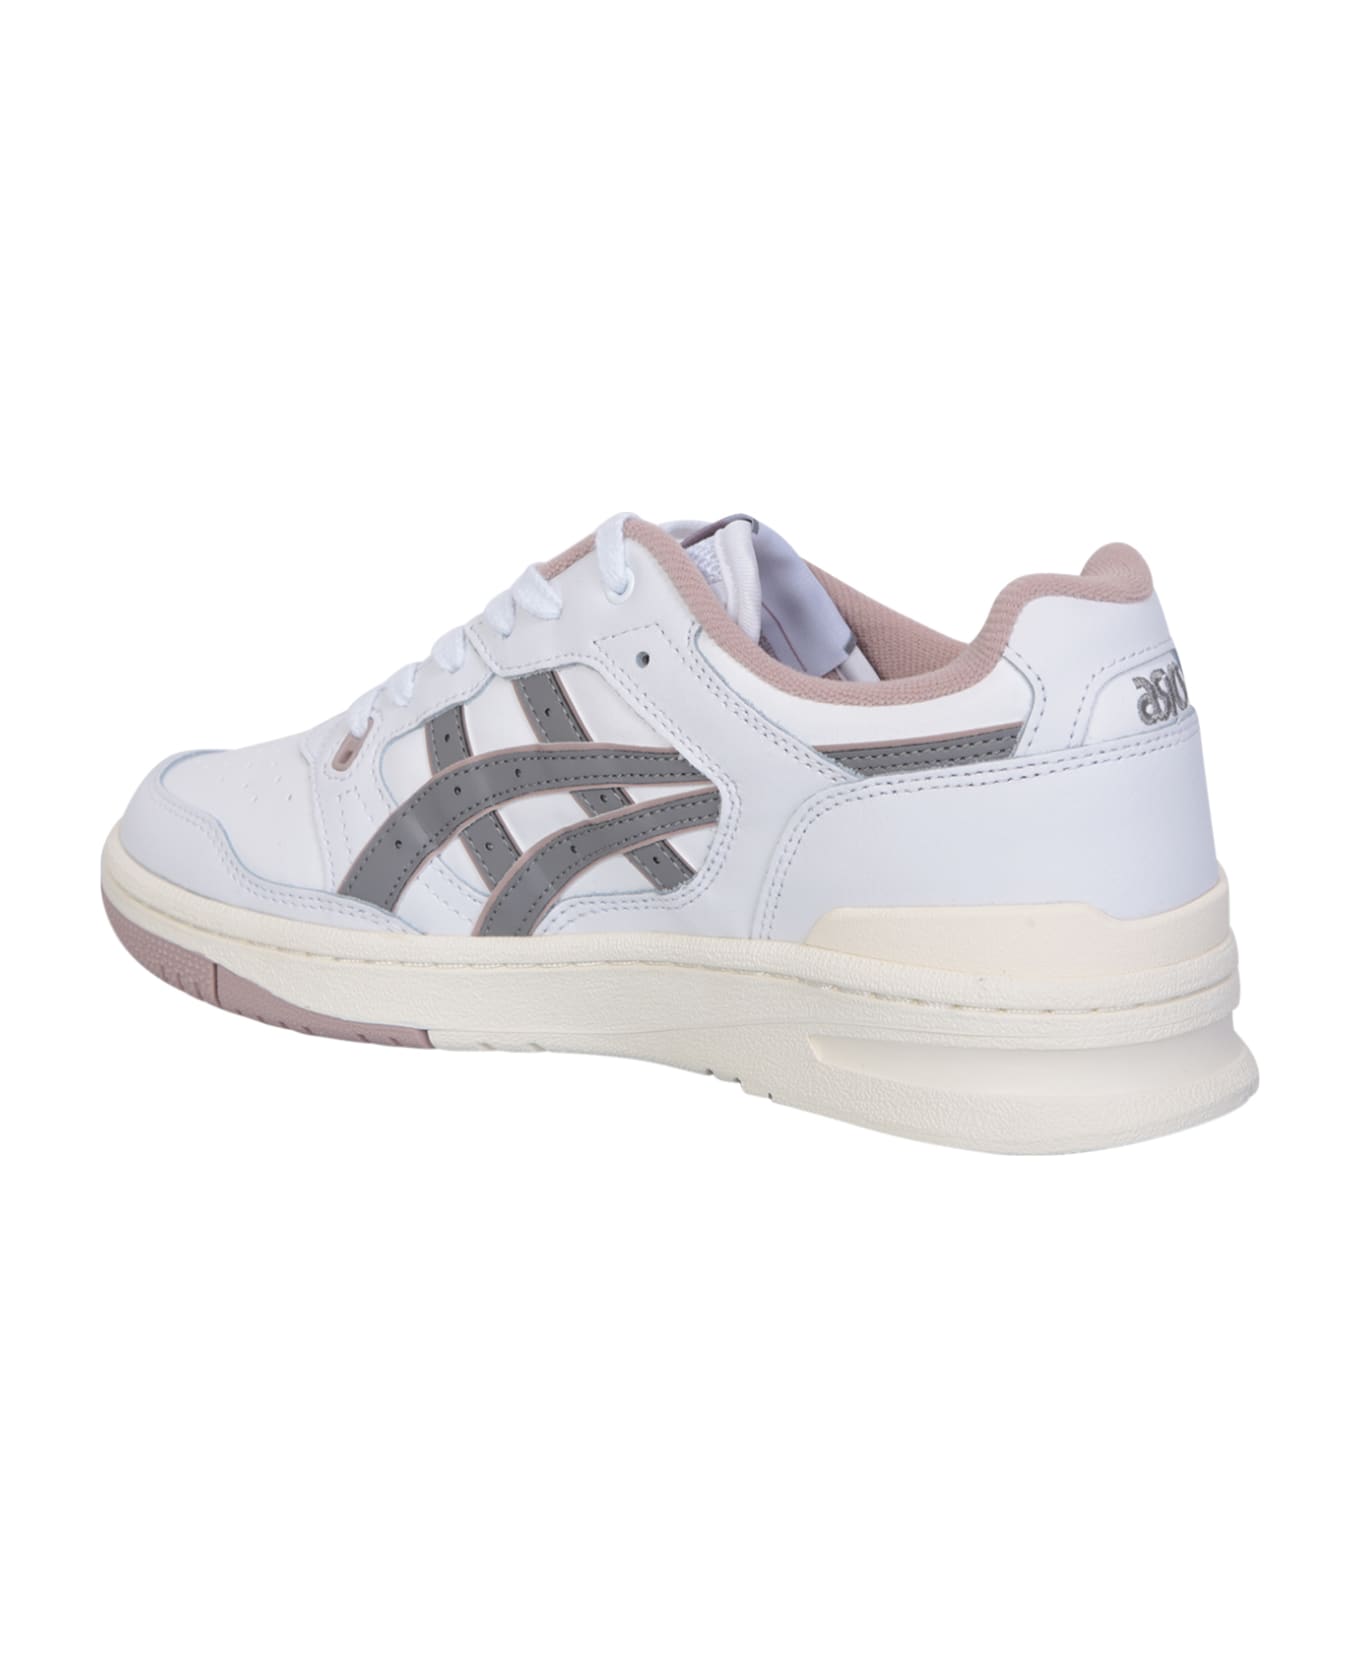 Asics White And Pink Ex89 Sneakers - White スニーカー